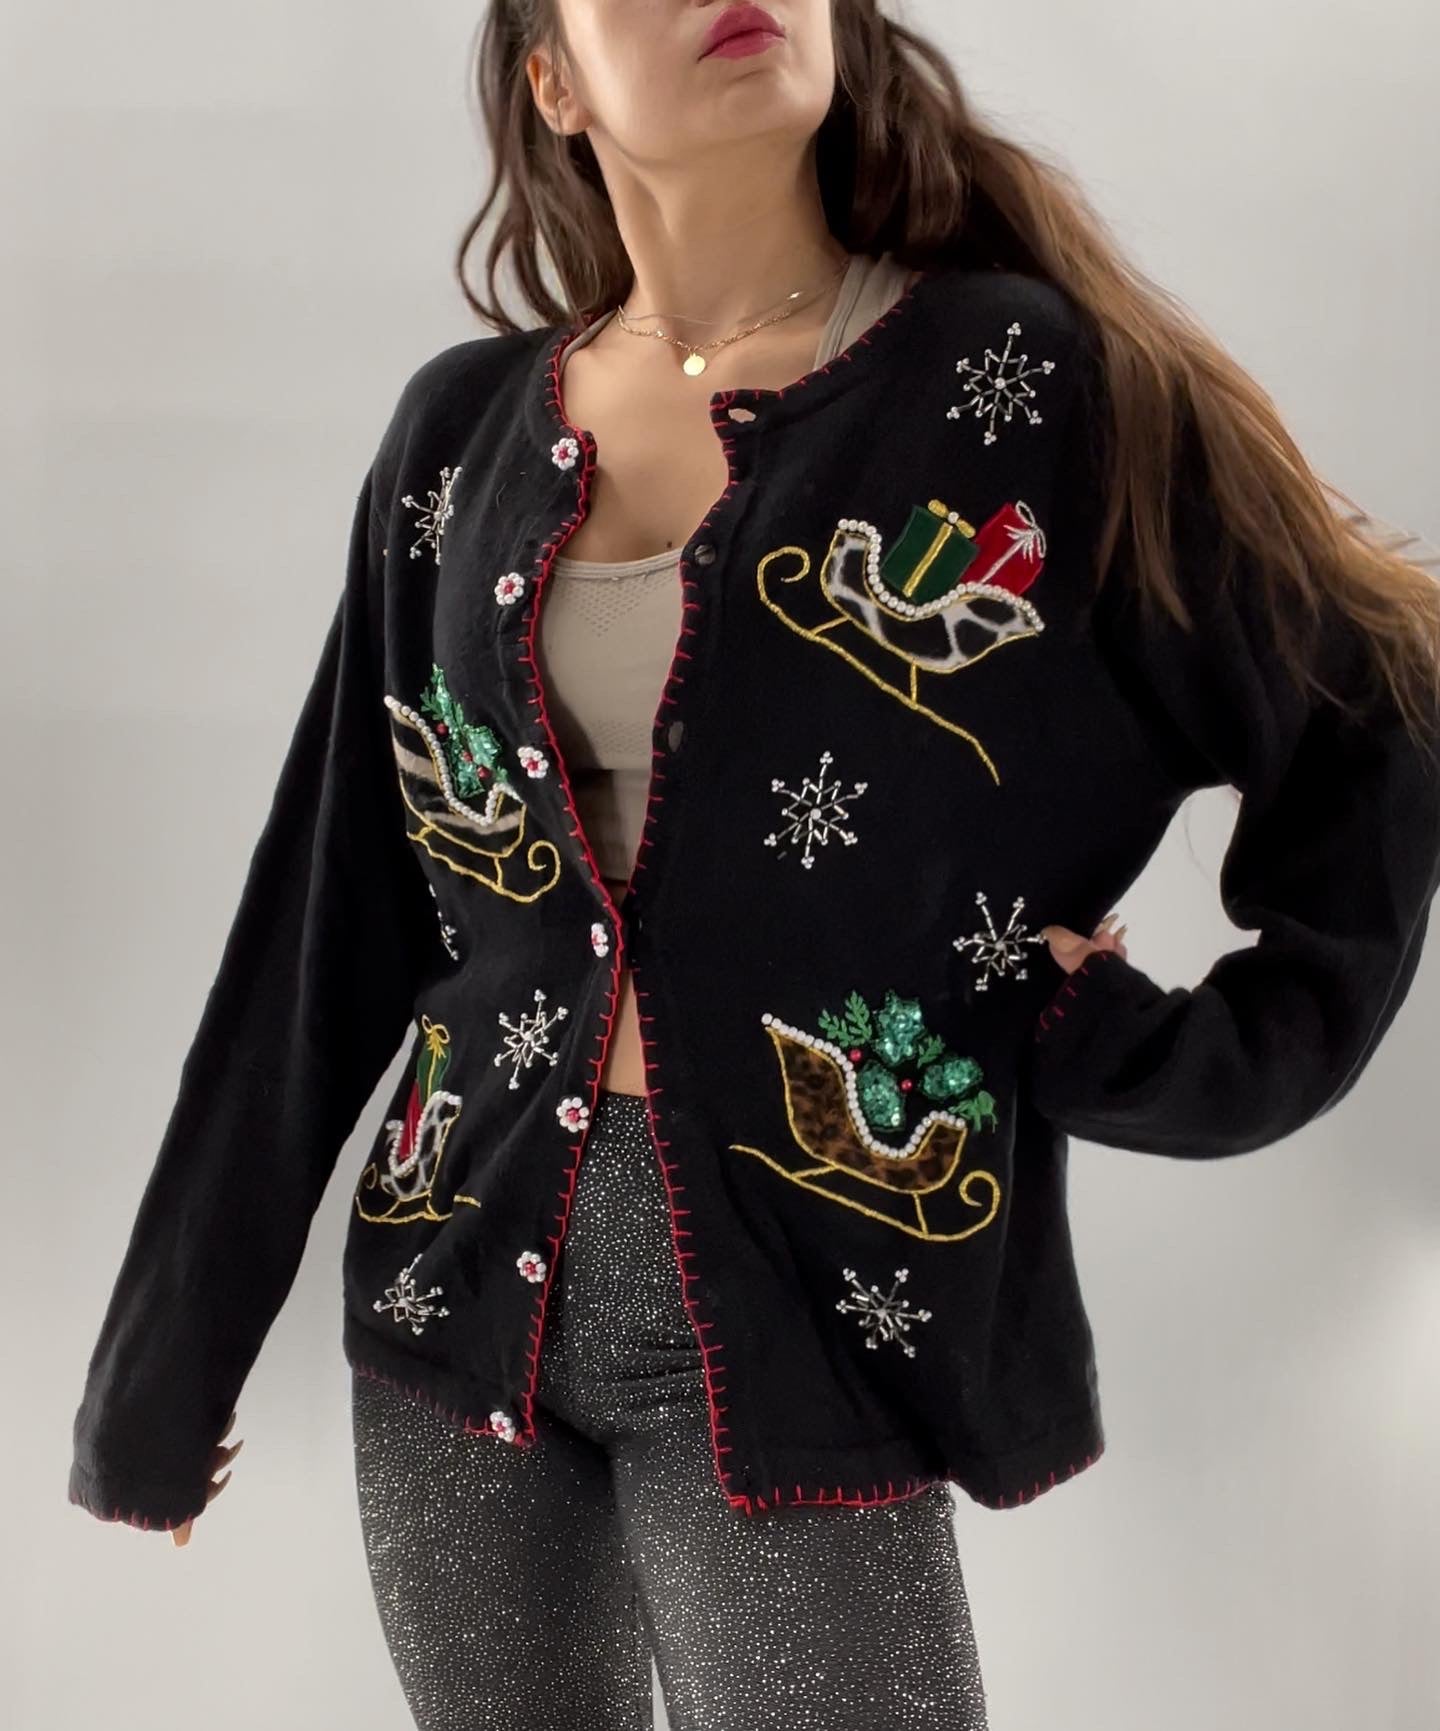 Urban Outfitters Wild Side Holiday Sweater (Medium)